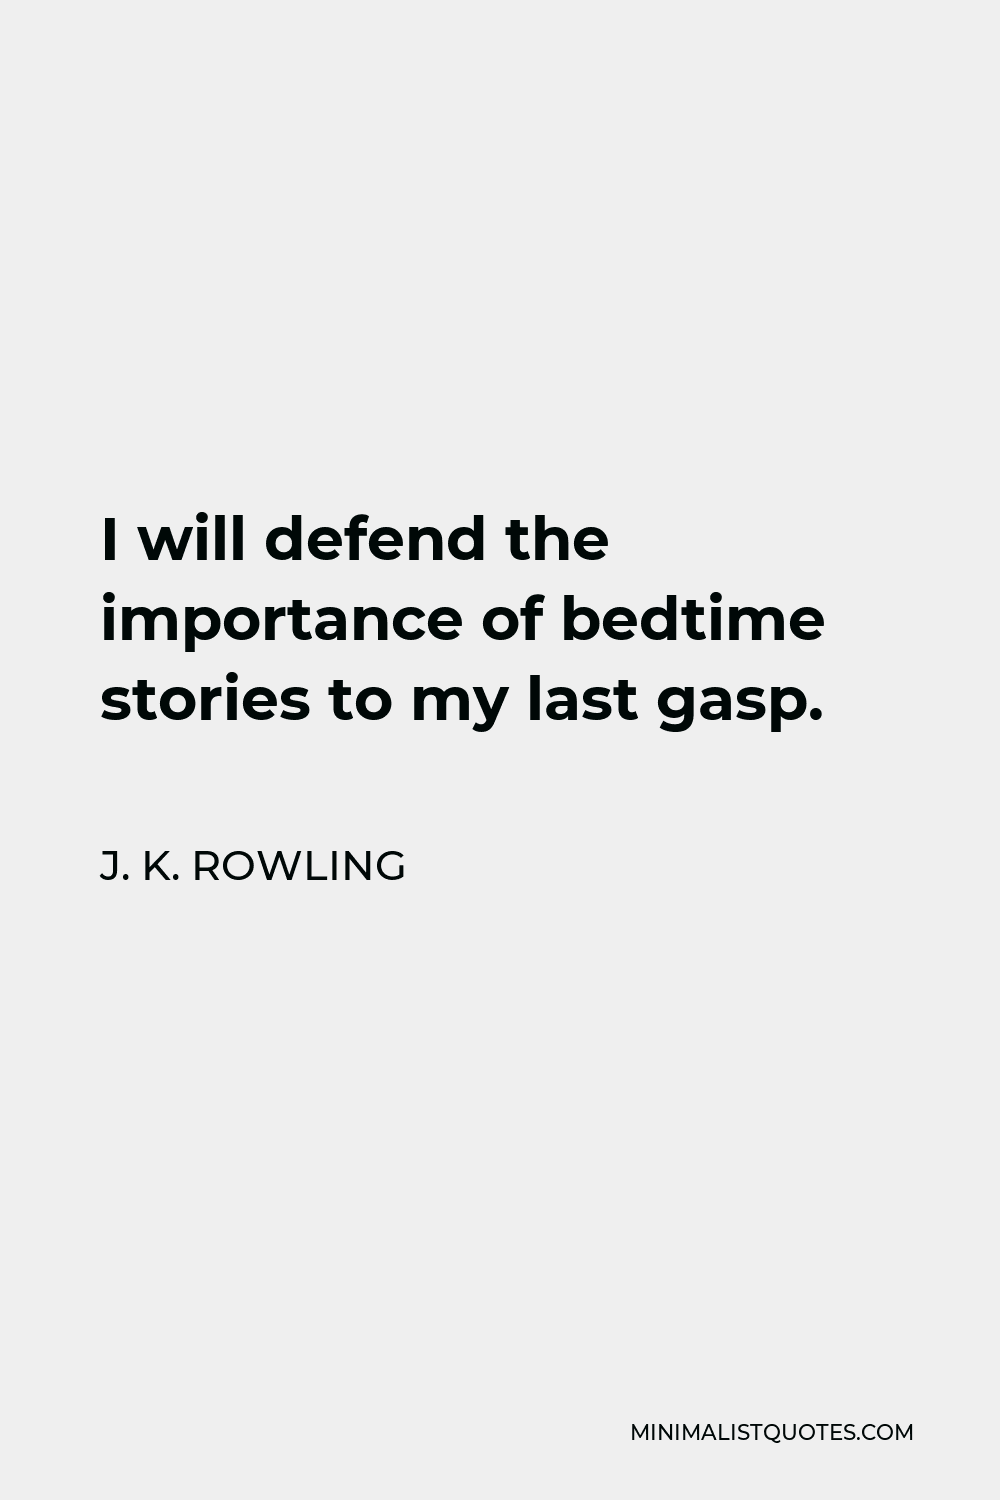 J. K. Rowling Quote - I will defend the importance of bedtime stories to my last gasp.